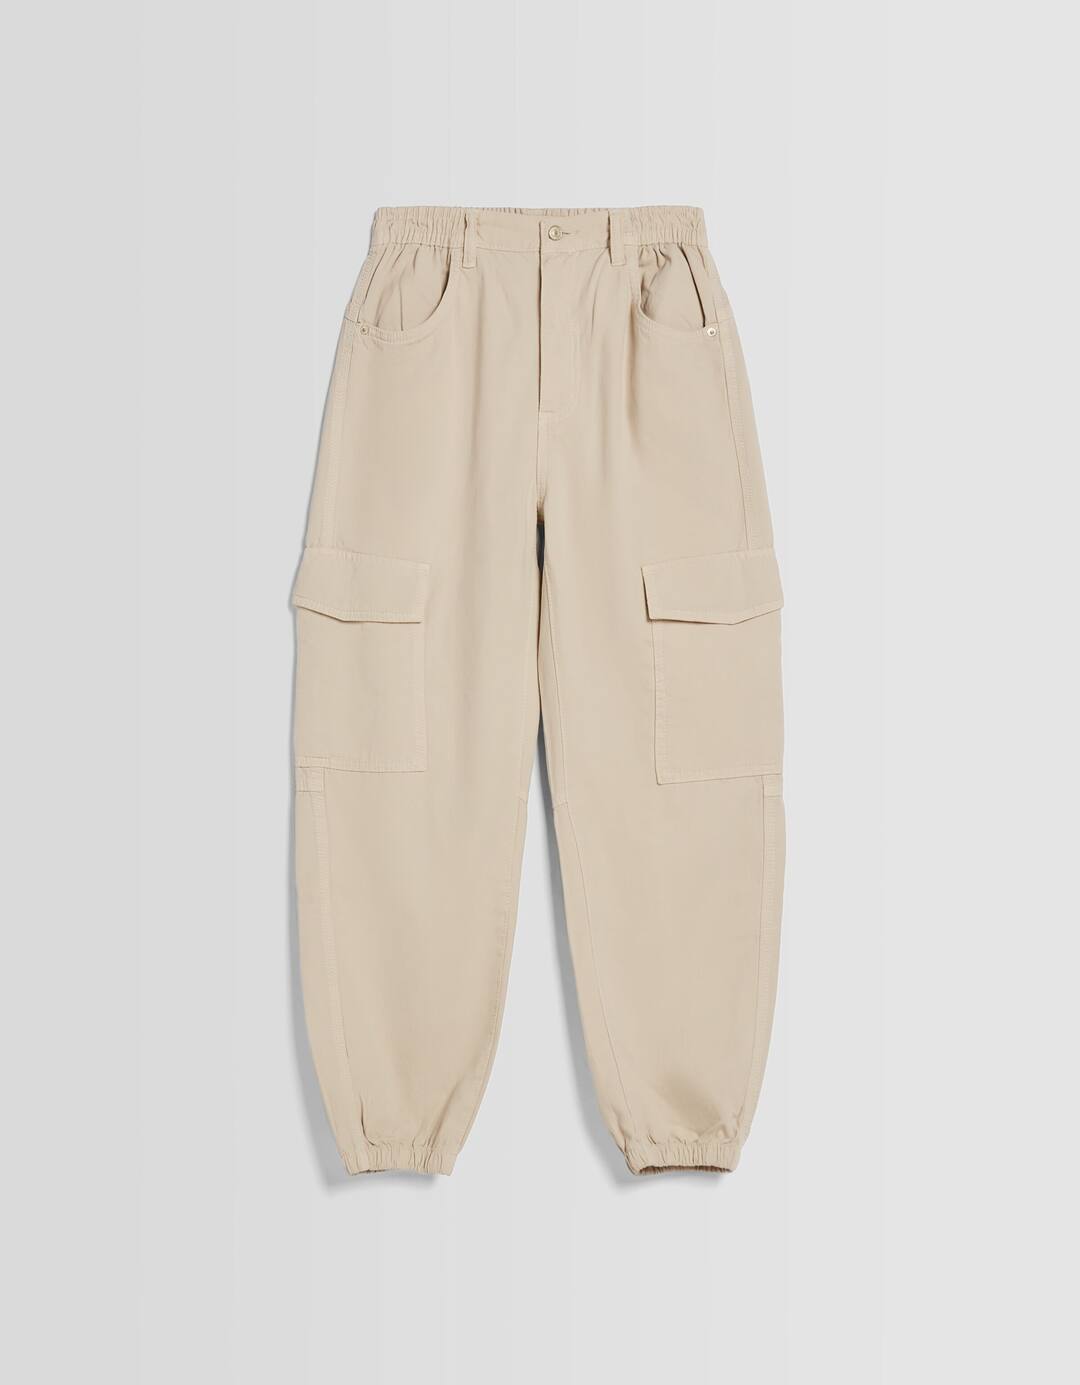 Cotton joggers with a gathered waist and pockets